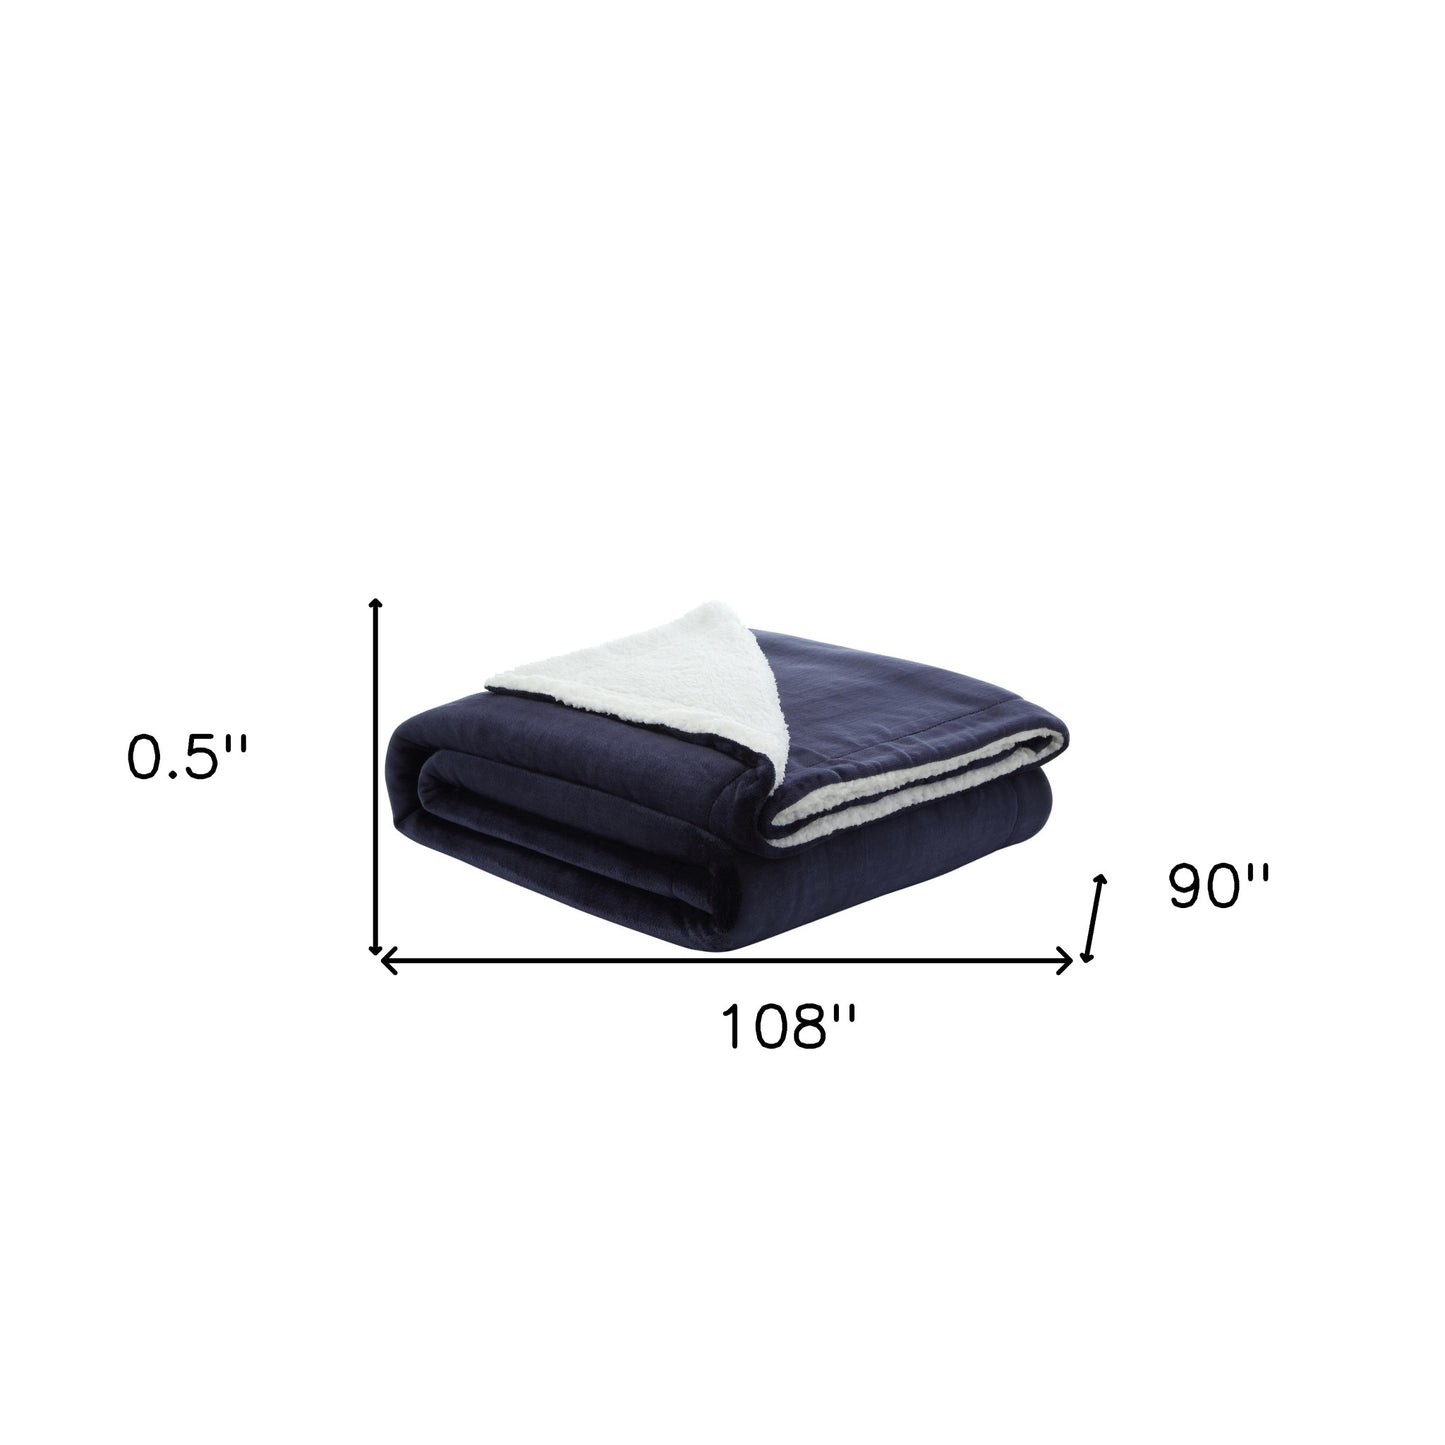 Navy Blue Knitted PolYester Solid Color Plush Queen Blanket